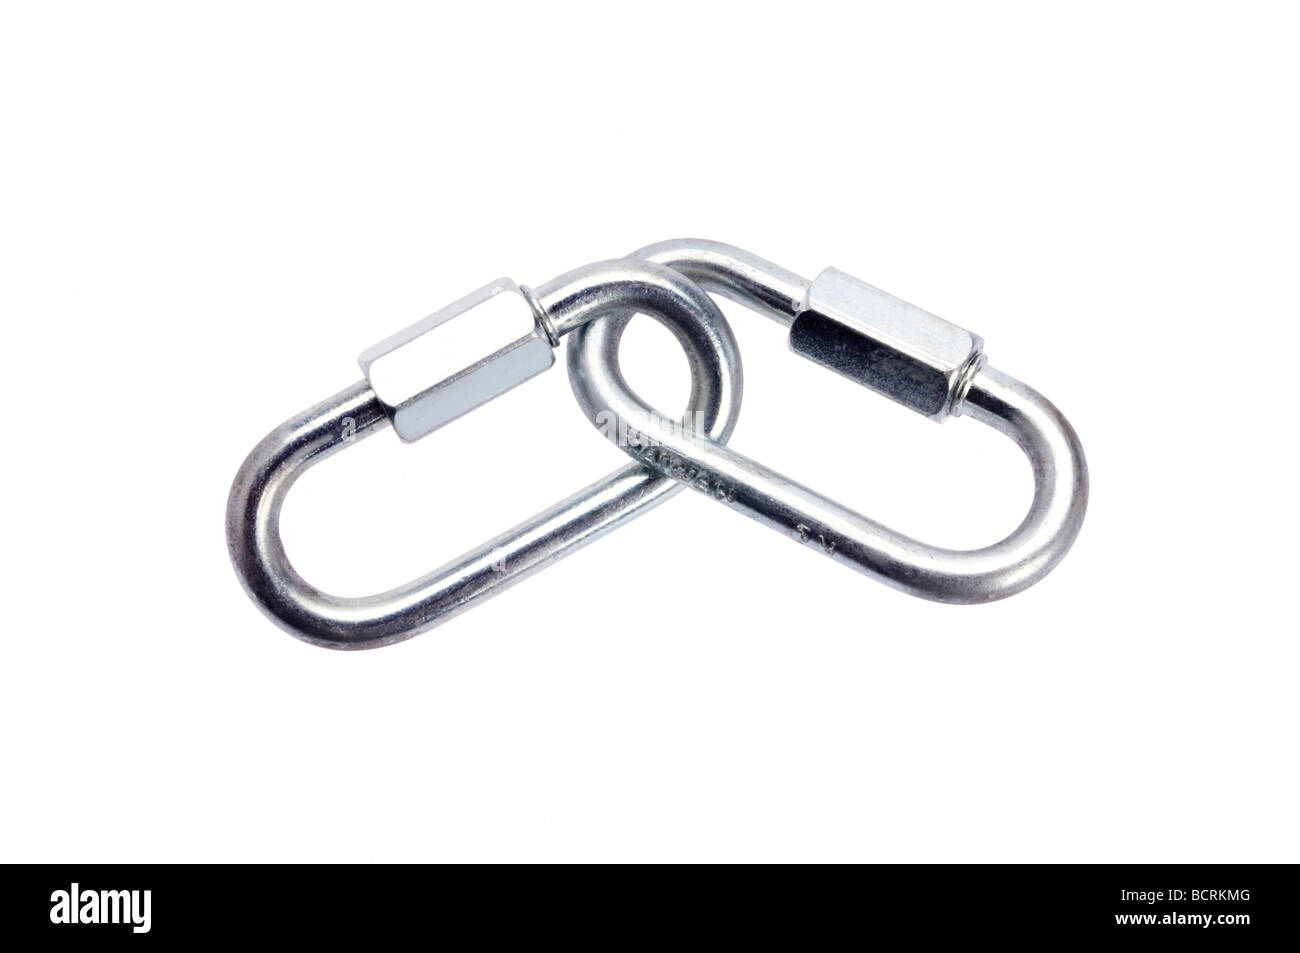 two carabiners linked together Stock Photo